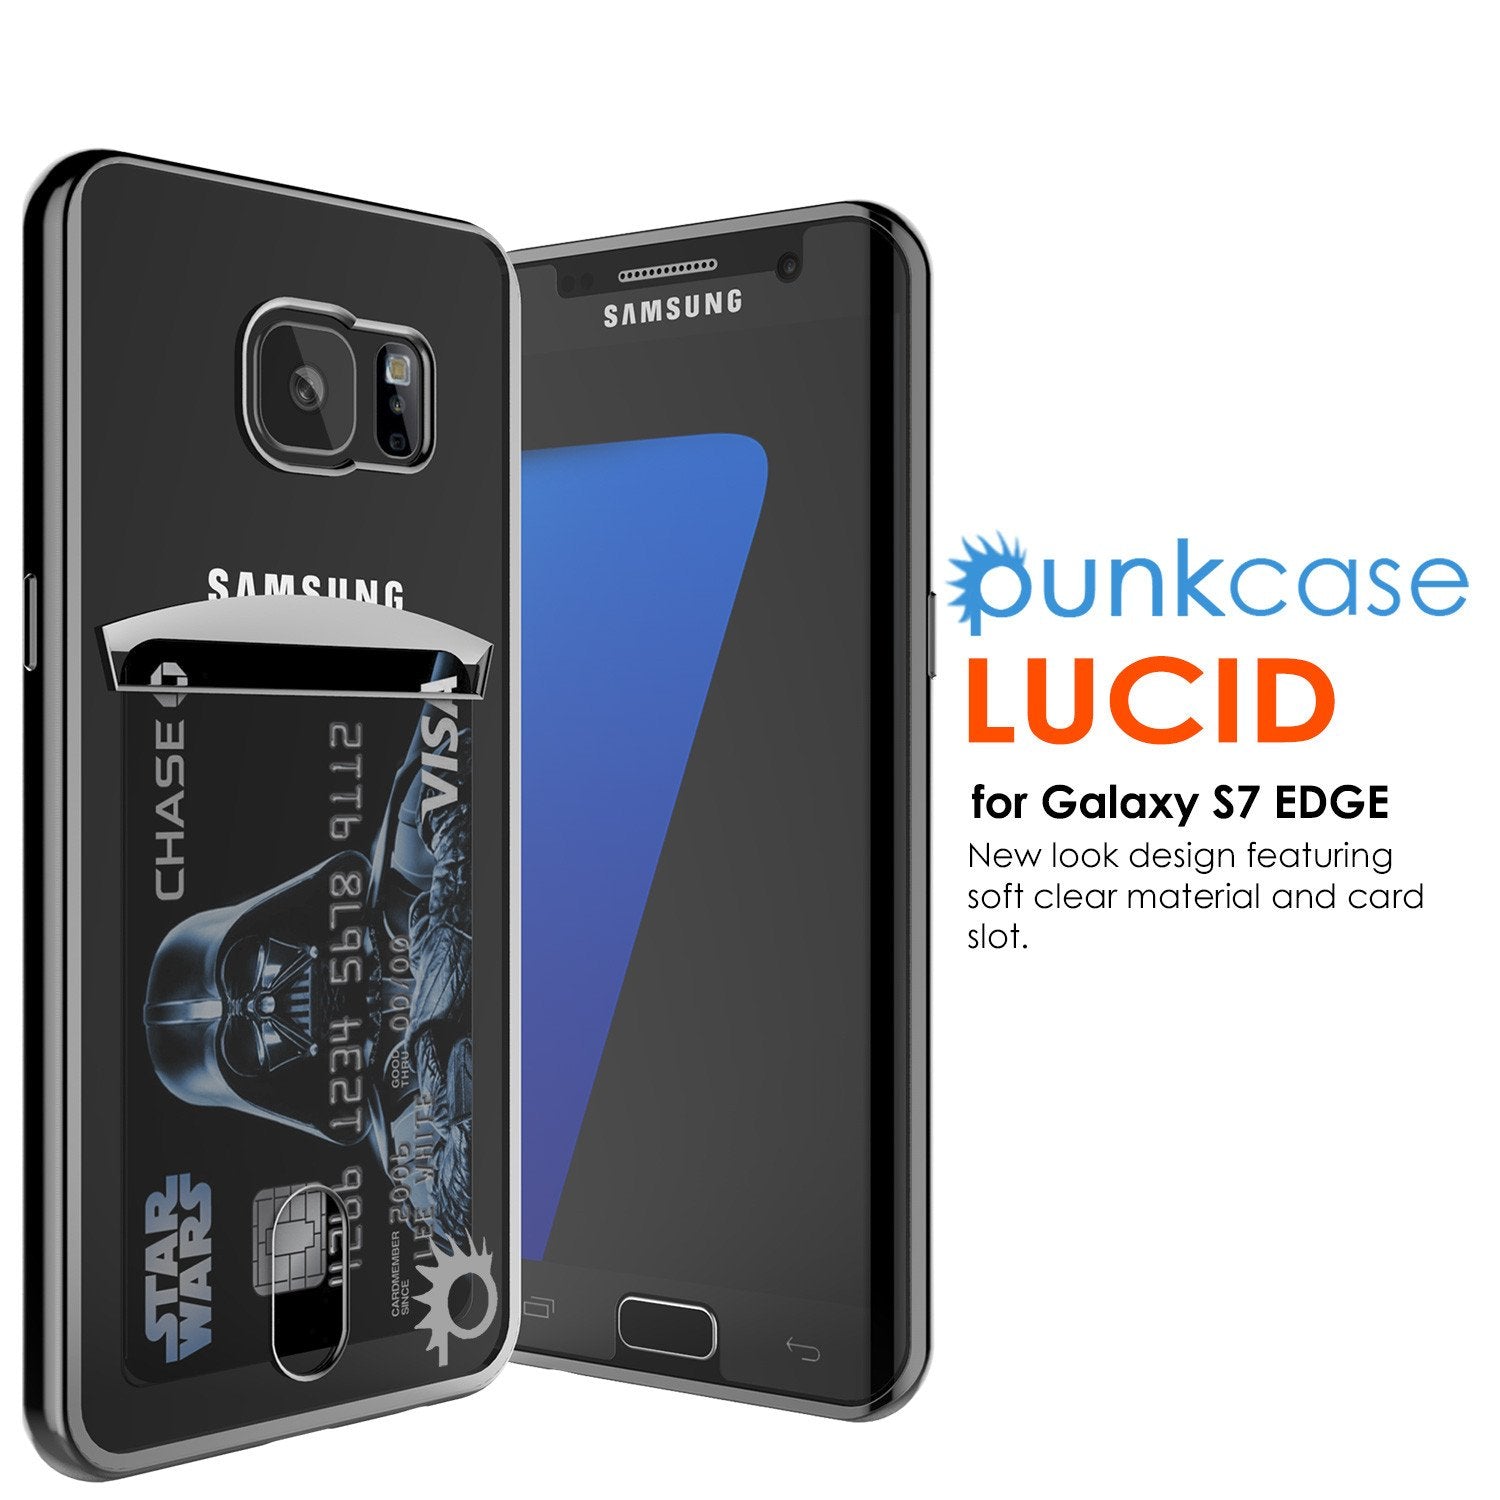 Galaxy S7 EDGE Case, PUNKCASE® LUCID Black Series | Card Slot | SHIELD Screen Protector | Ultra fit - PunkCase NZ